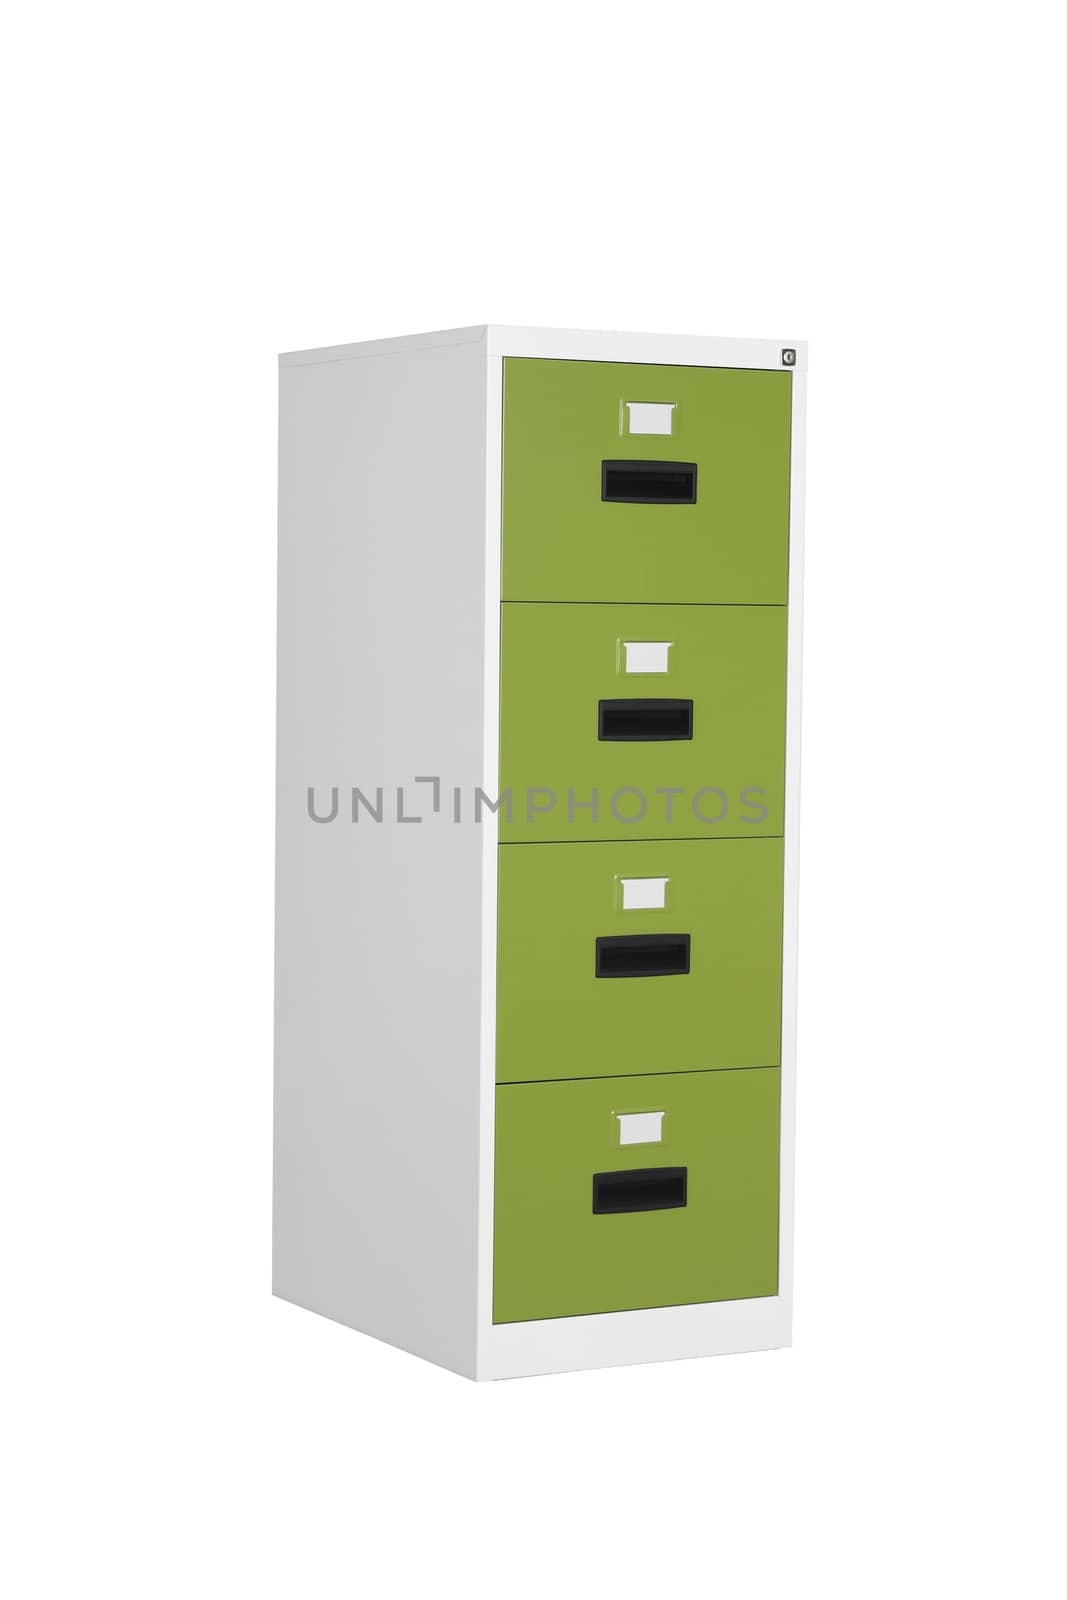 Steel drawers office furniture isolated on white background. Cabinet with drawers for business files and folders.